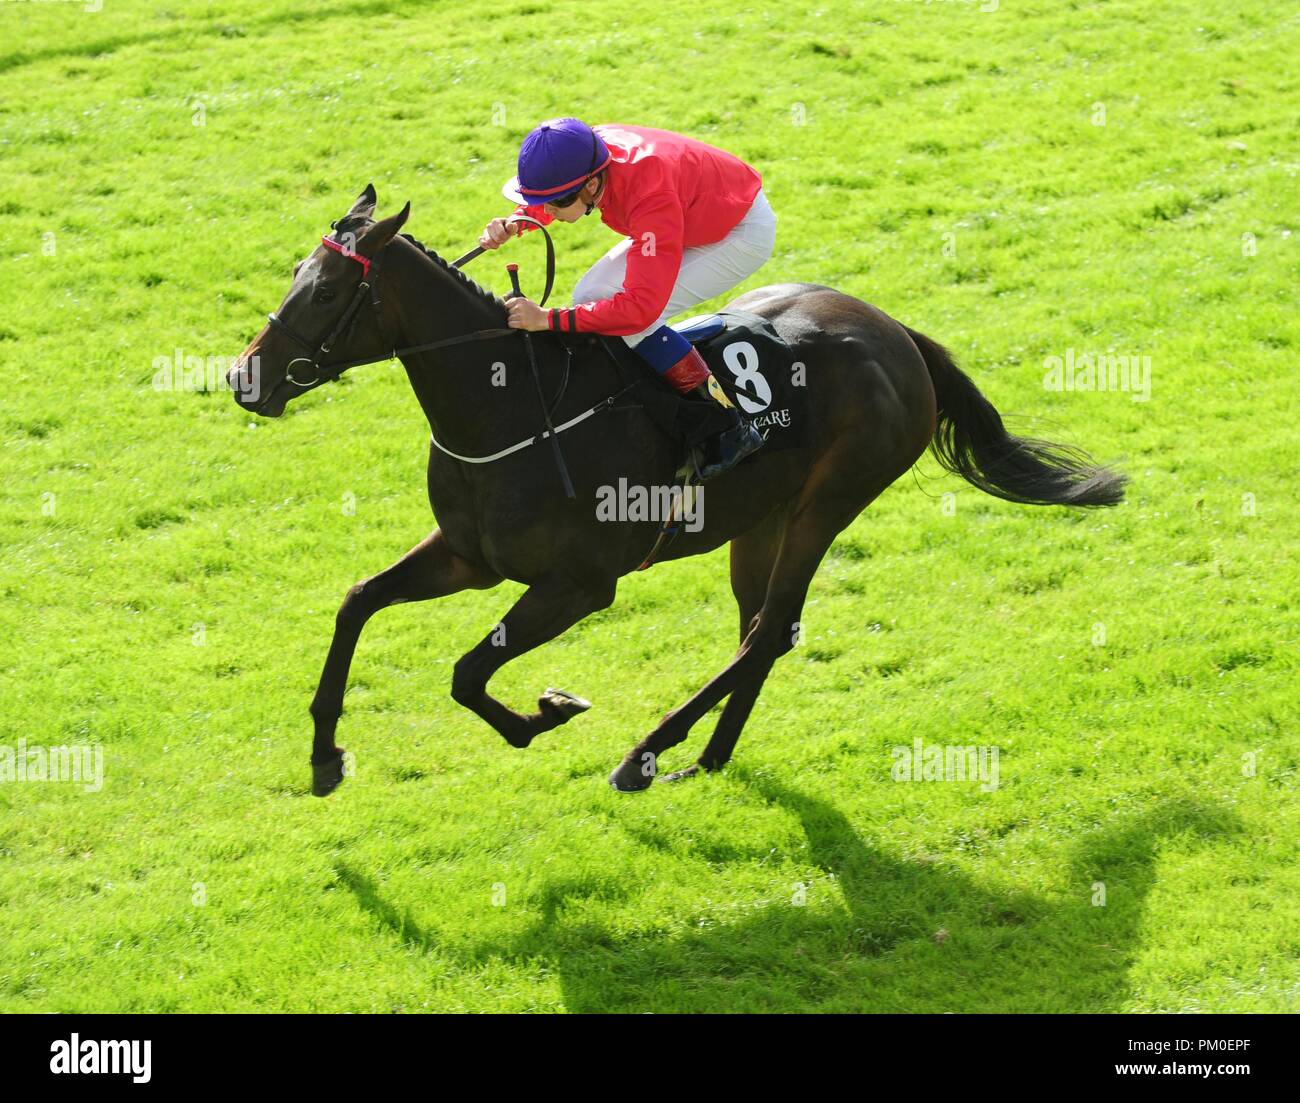 Skitter Scatter ridden by Ronan Whelan (left) win the Moyglare Stud Stakes during day two of the 2018 Longines Irish Champions Weekend at Curragh racecourse County Neath. Stock Photo